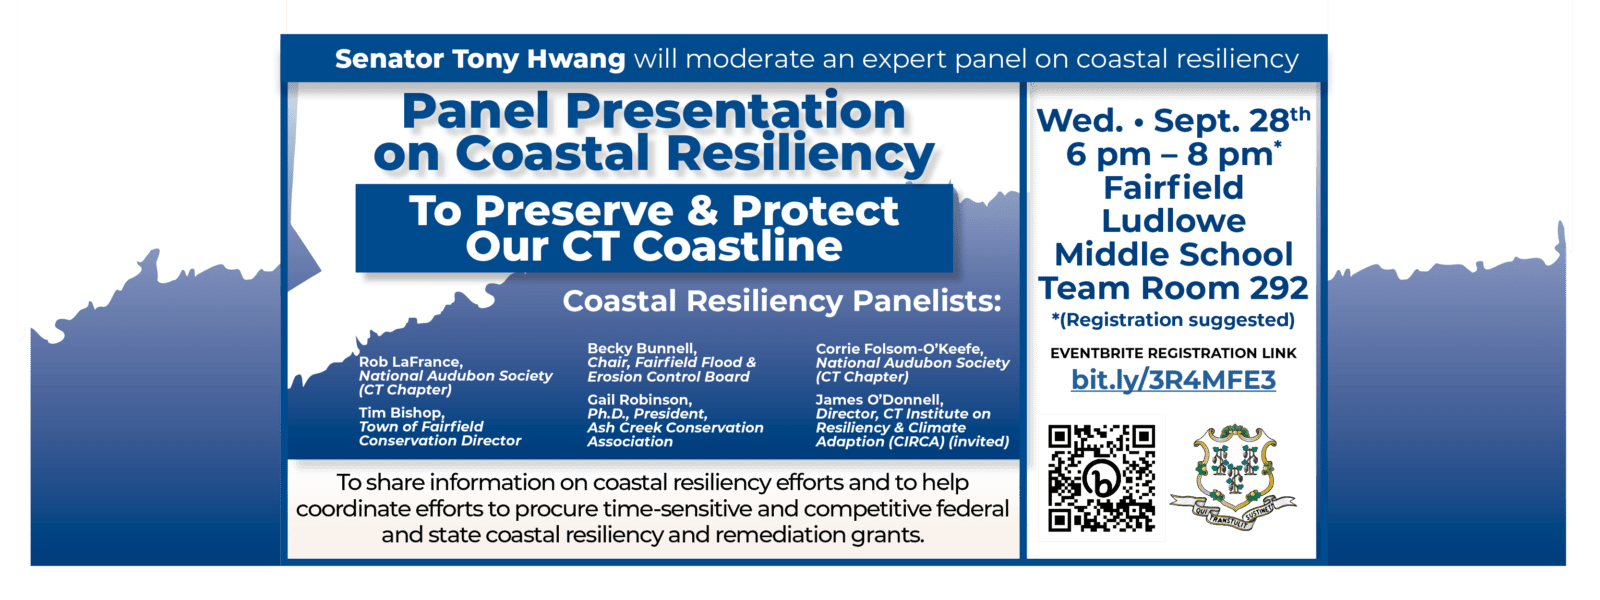 Join us Wednesday in Fairfield for a Coastal Resiliency Discussion!